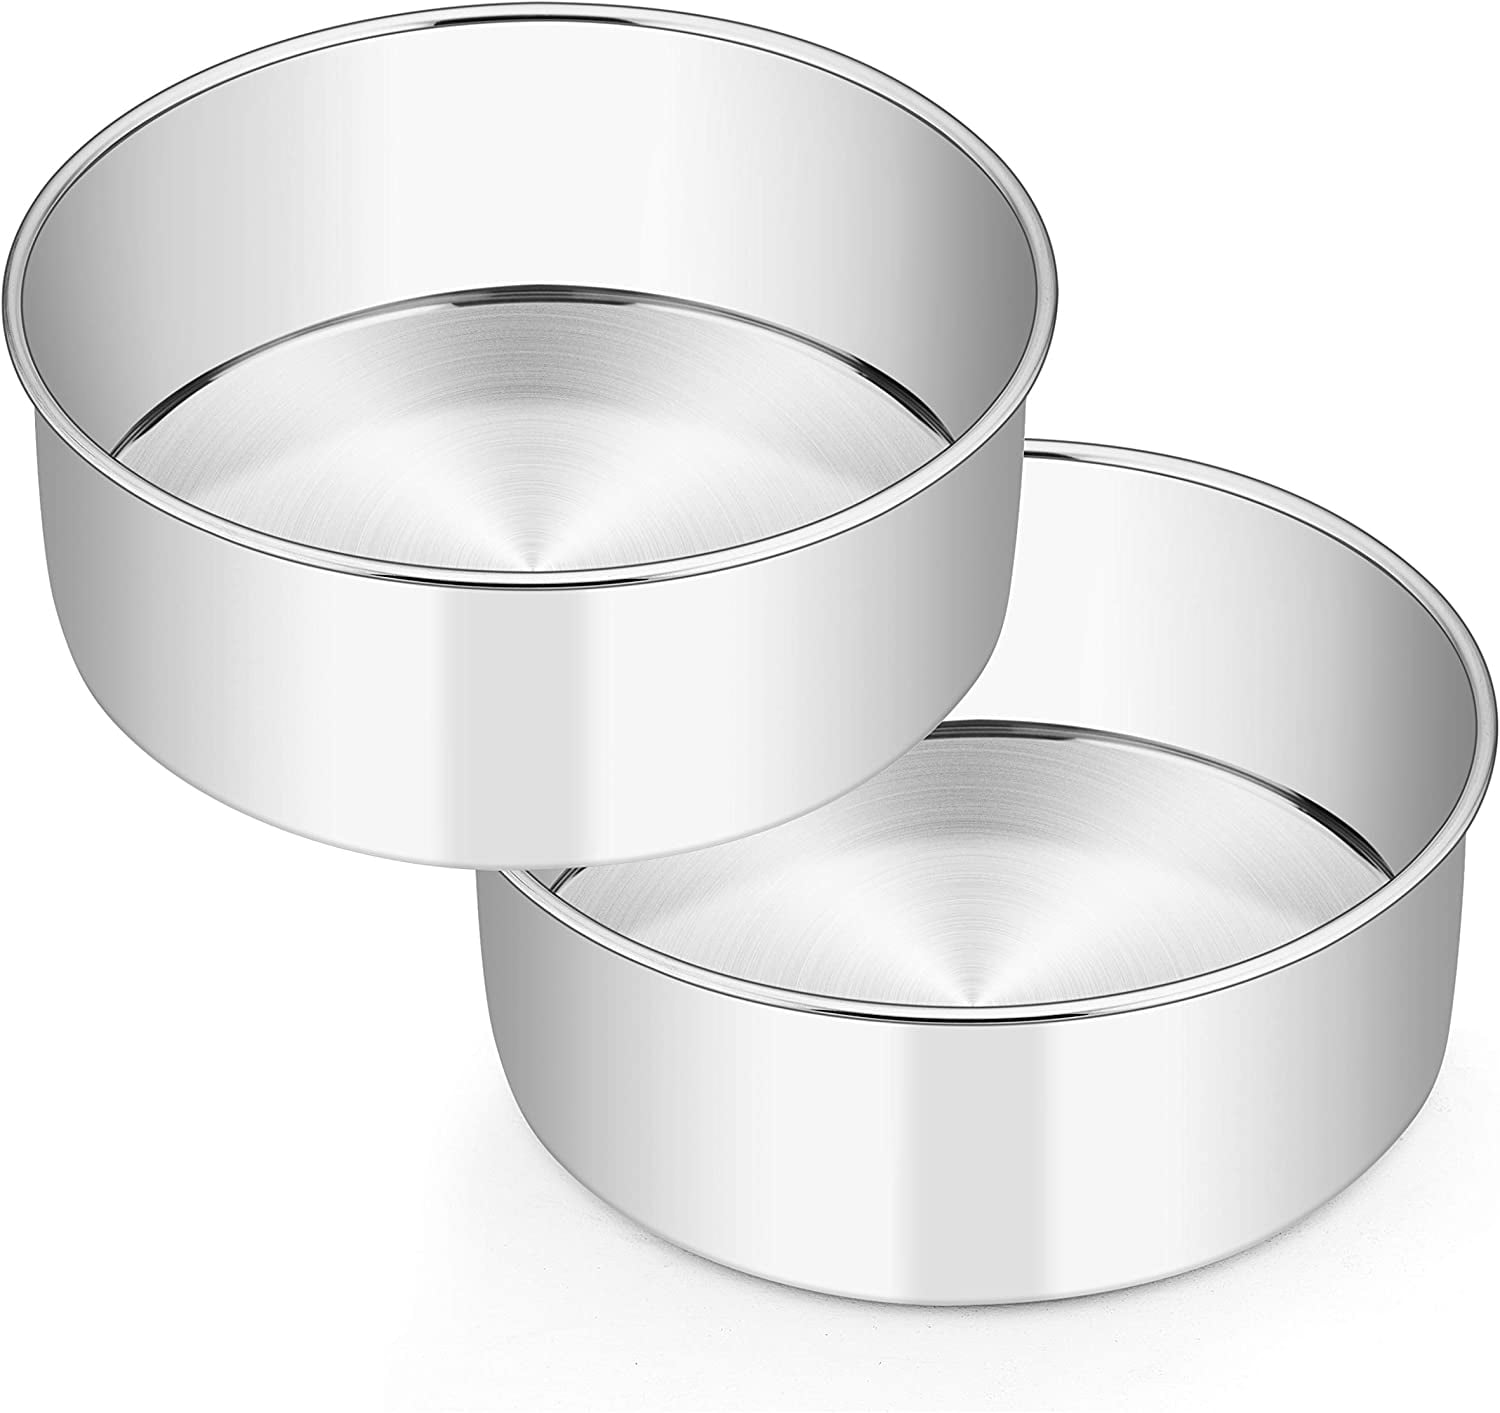 E-far 8 Inch Cake Pan Set of 2, Nonstick Round Cake Pans Tins with